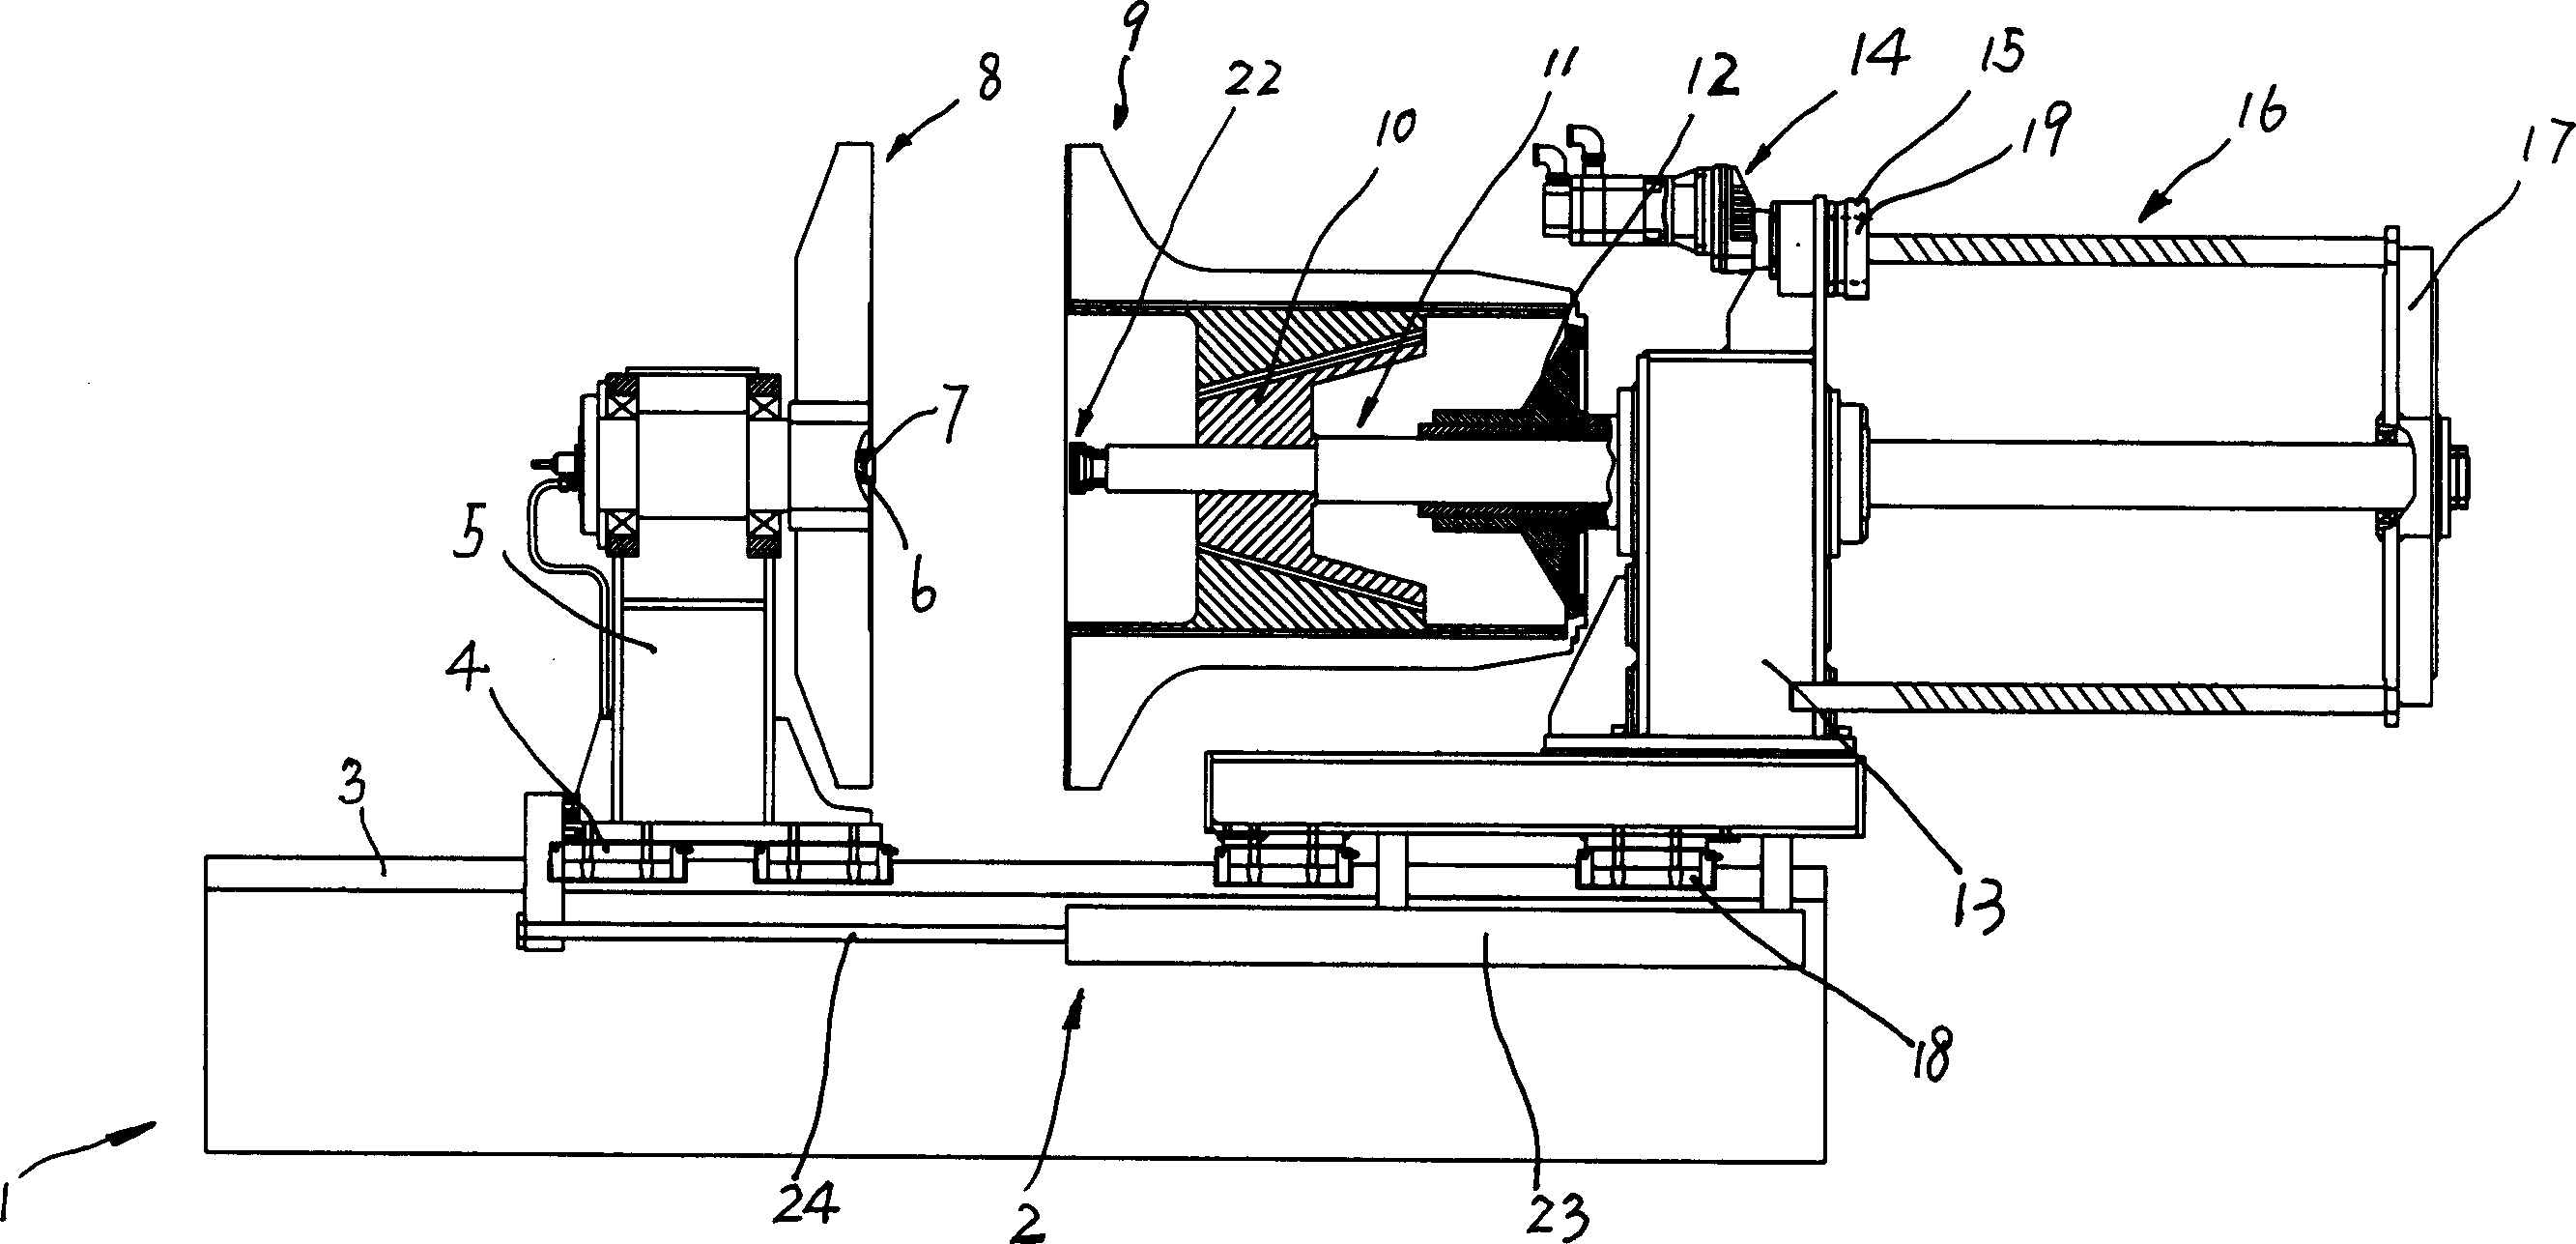 Coiling apparatus of re-spooling machine